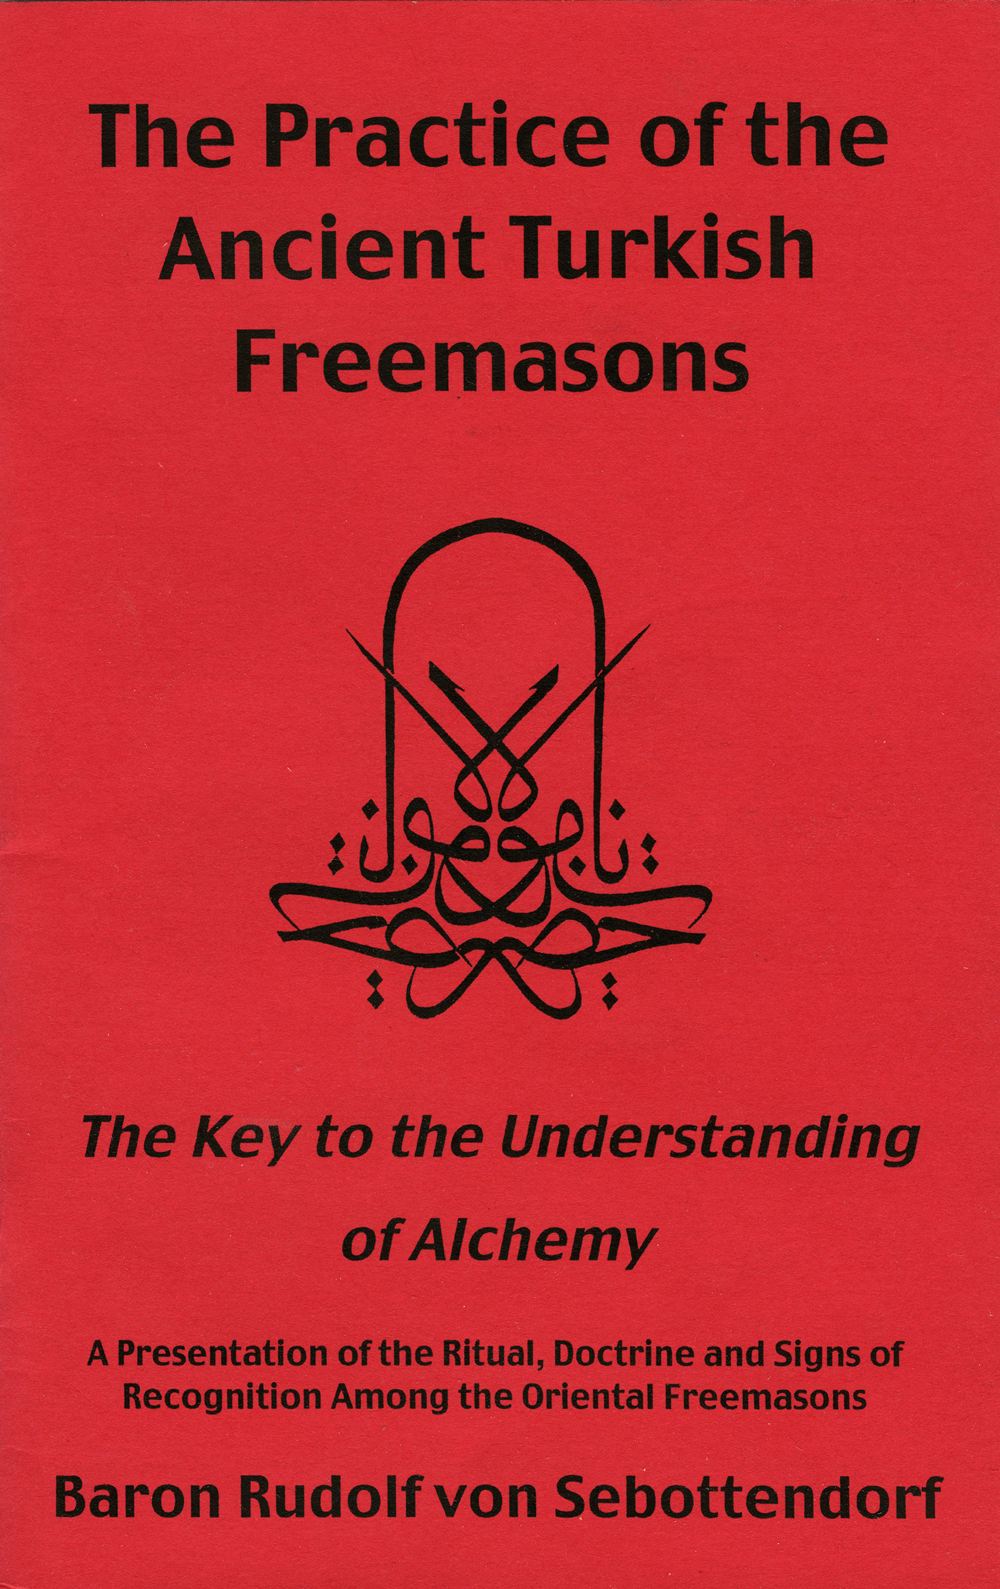 The Practice of the Ancient Turkish Freemasons